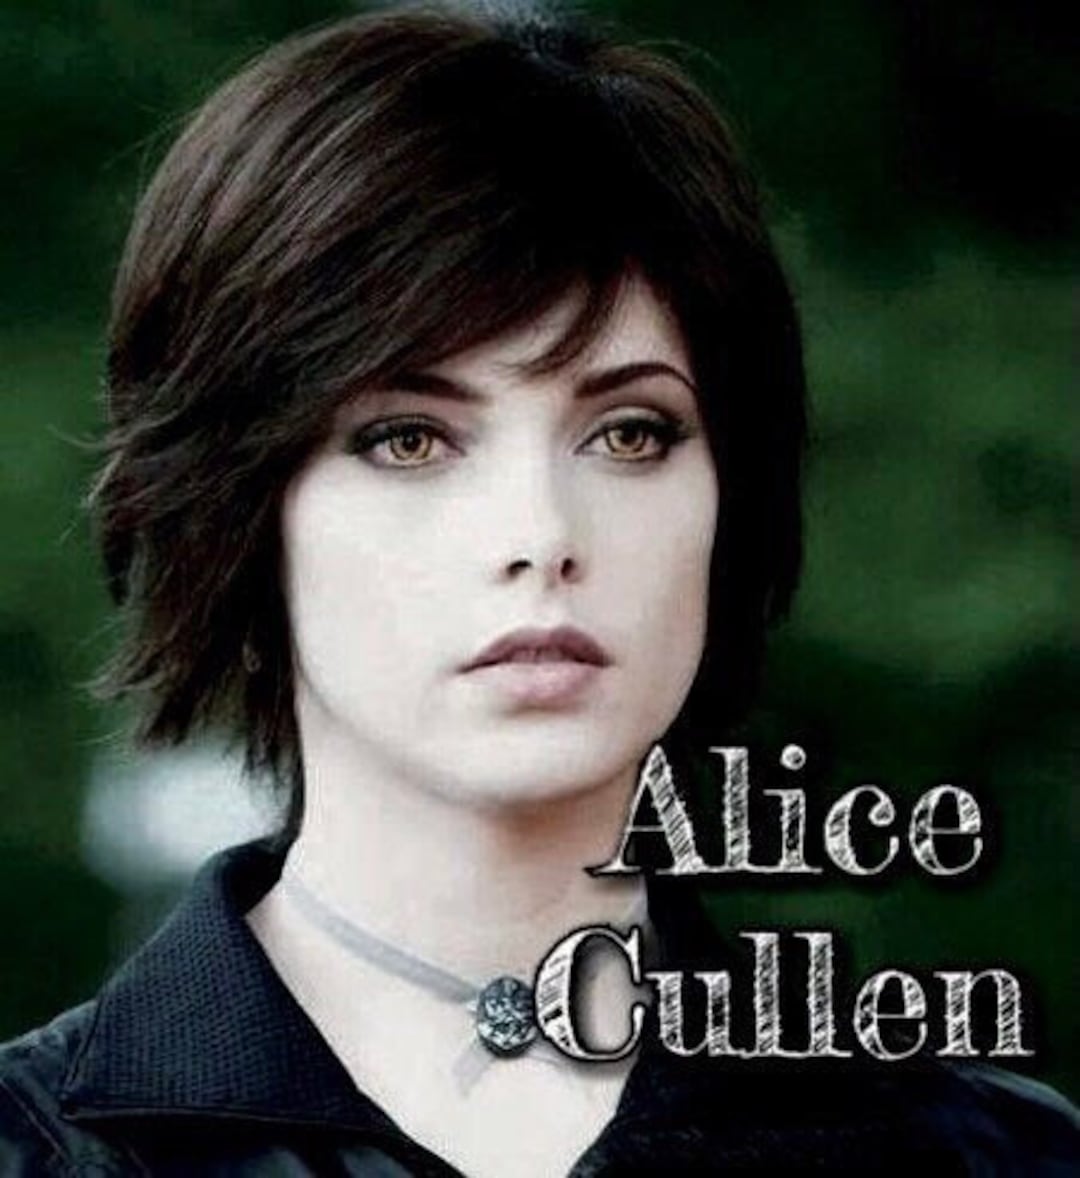 courtni johnson share pictures of alice from twilight photos